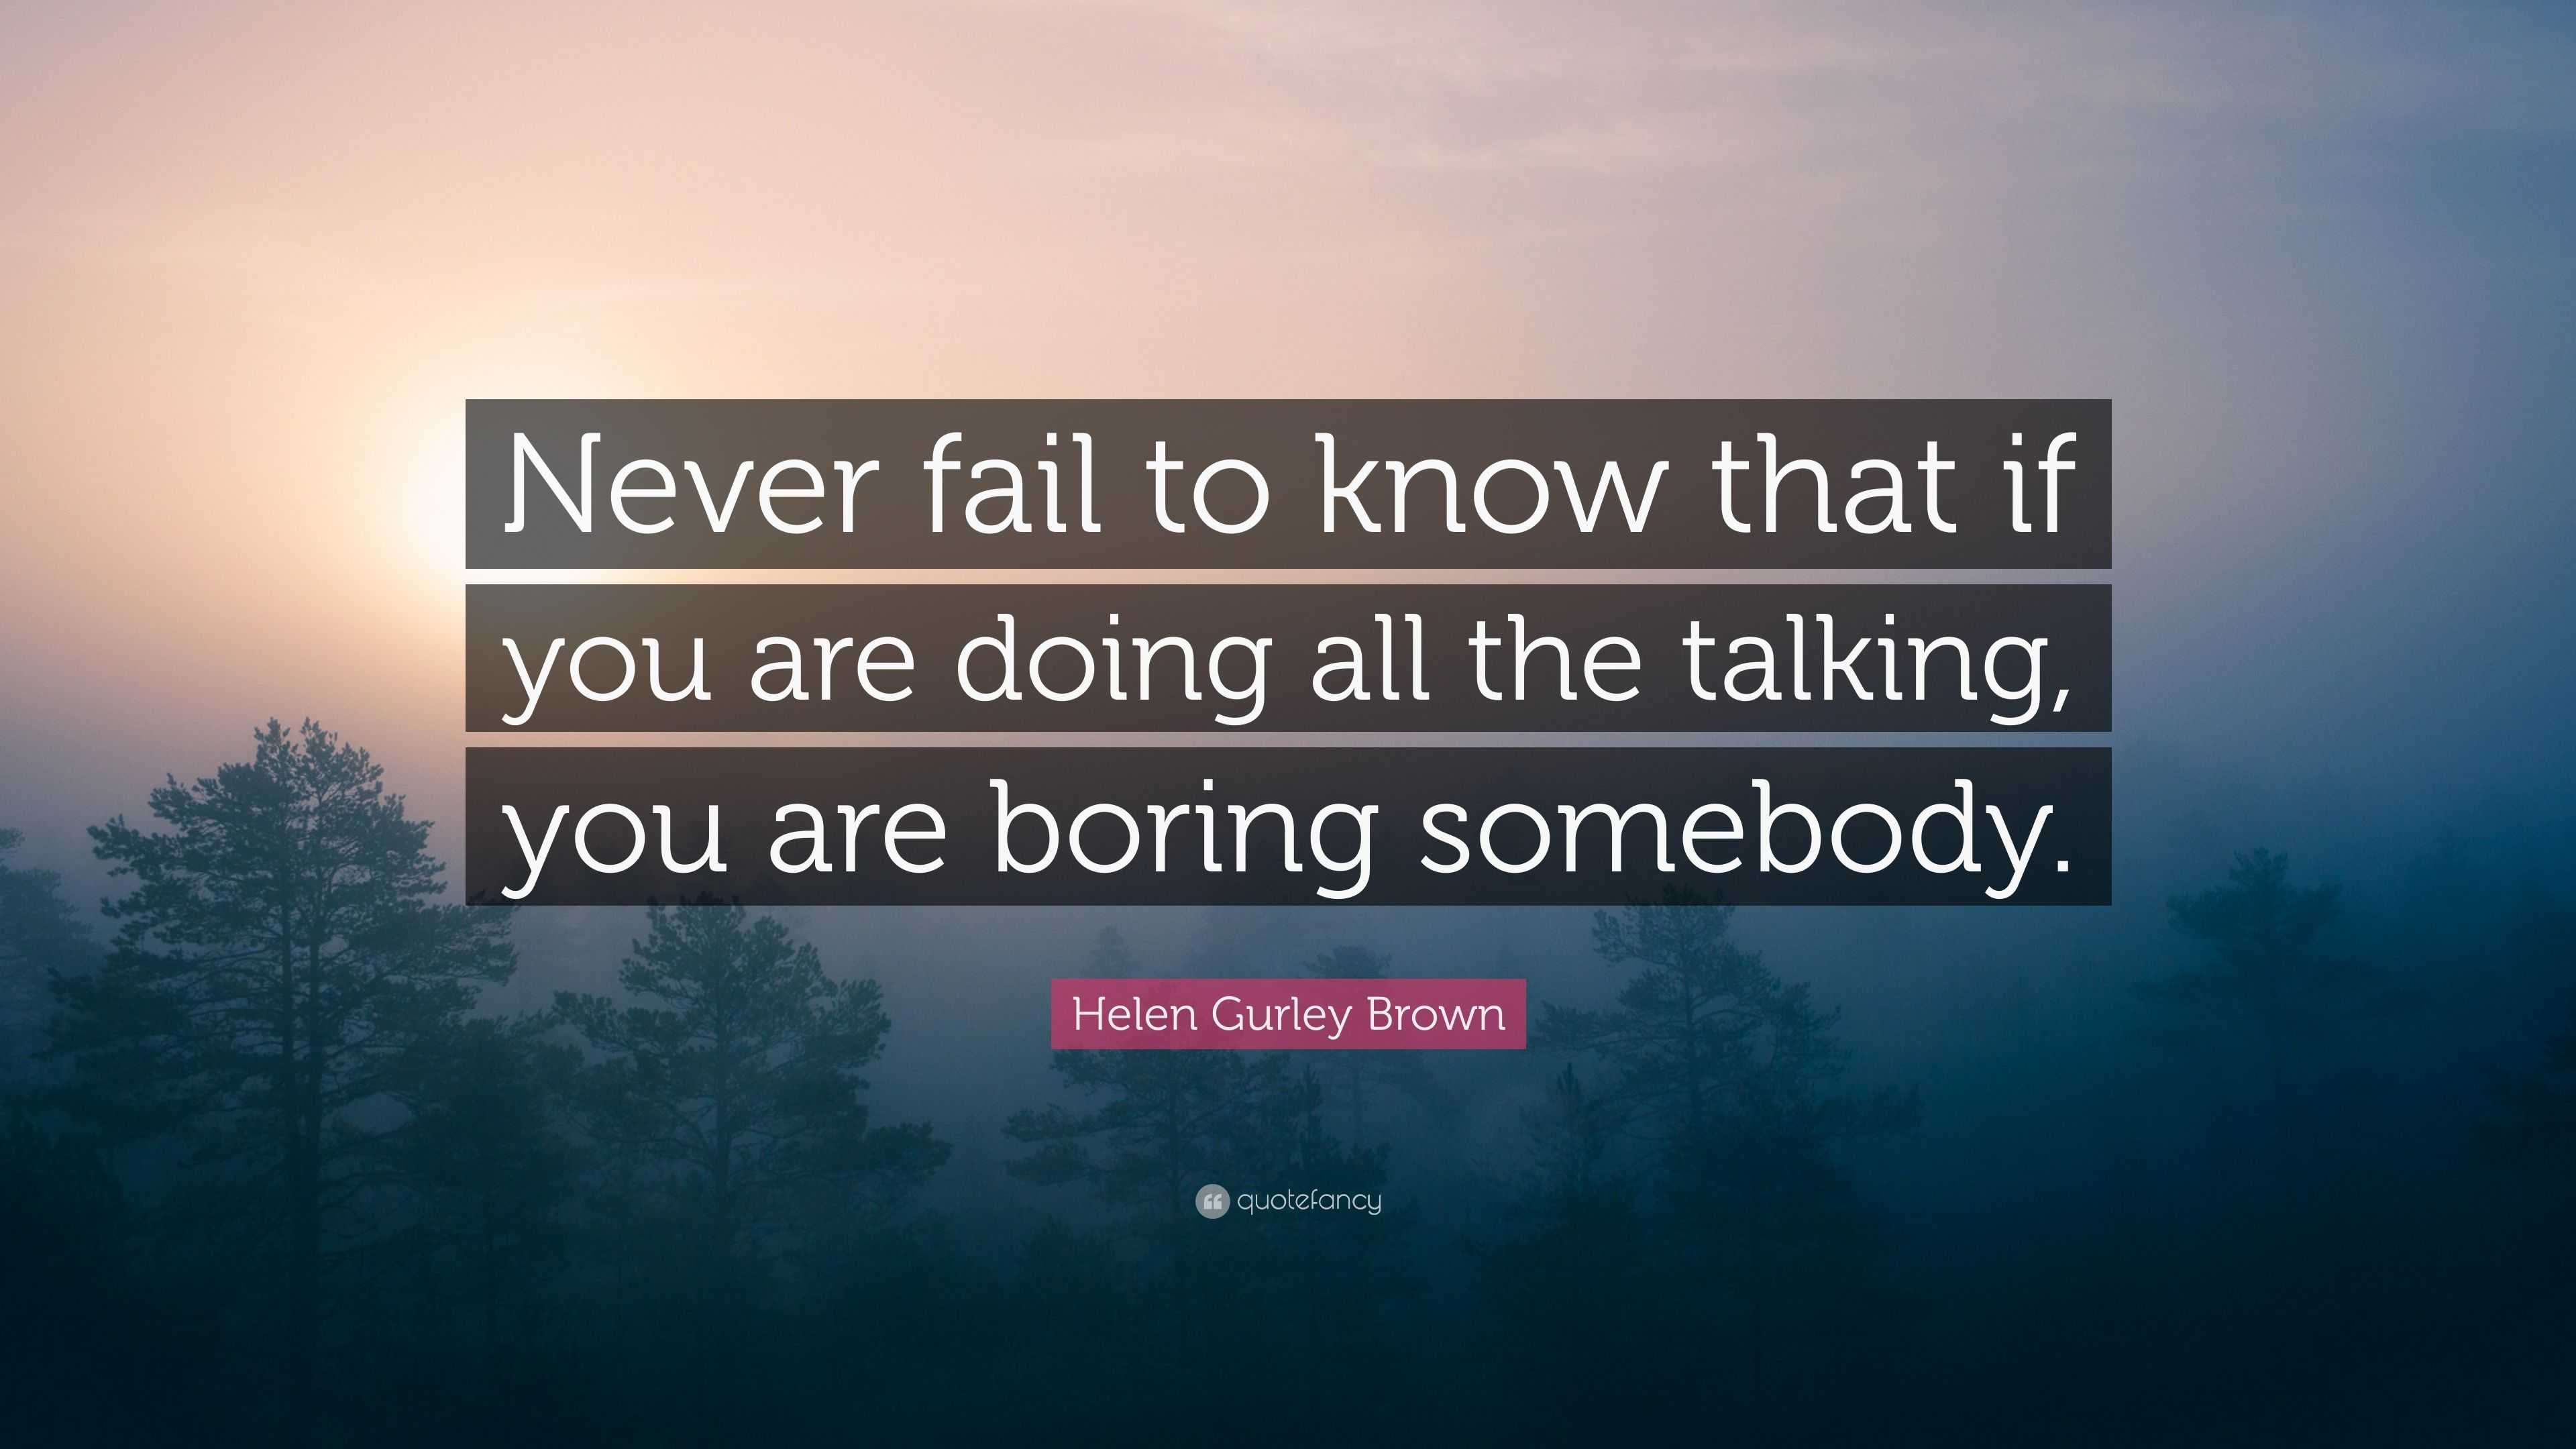 Helen Gurley Brown Quote “never Fail To Know That If You Are Doing All The Talking You Are